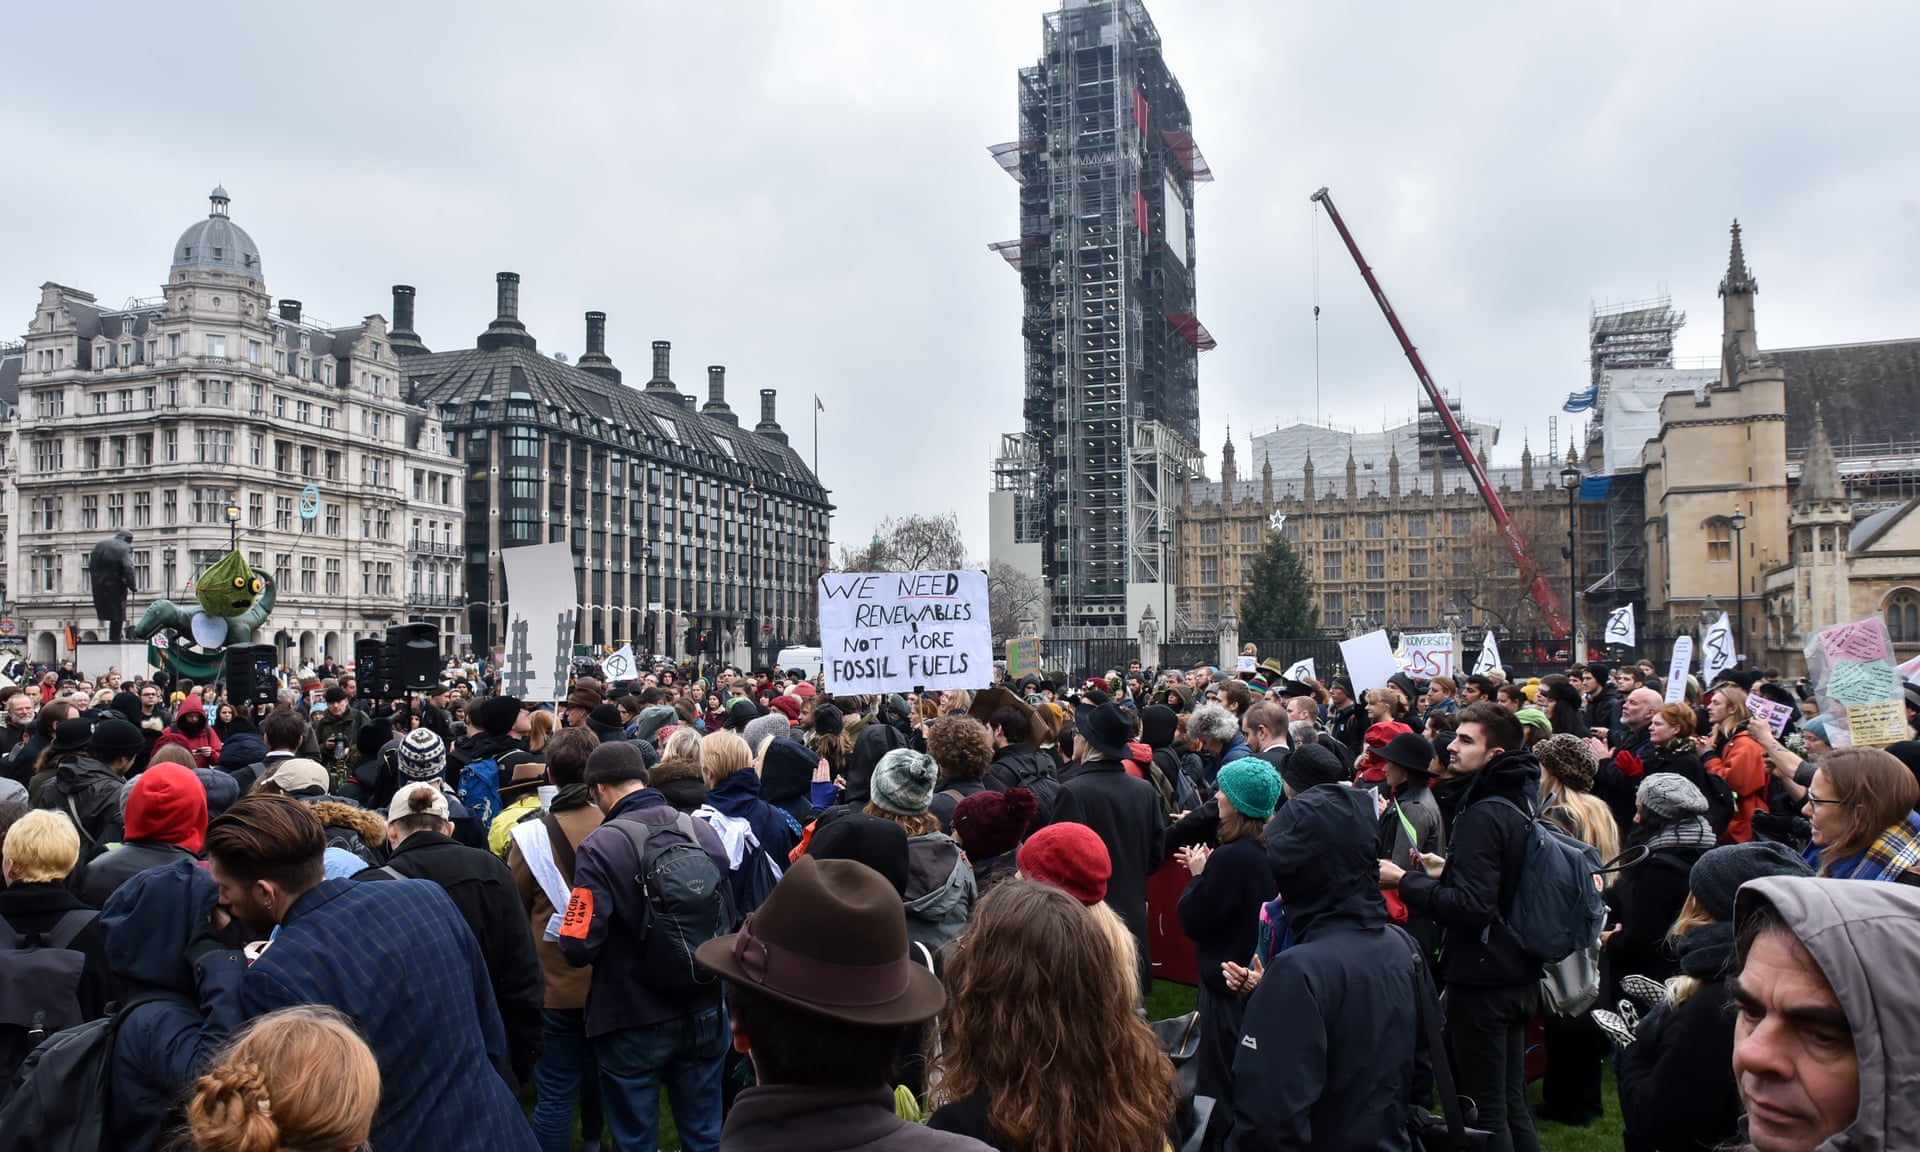 An estimated 1,000 protesters gathered on the green in Parliament Square. Photograph: Matthew Chattle/Barcroft Images